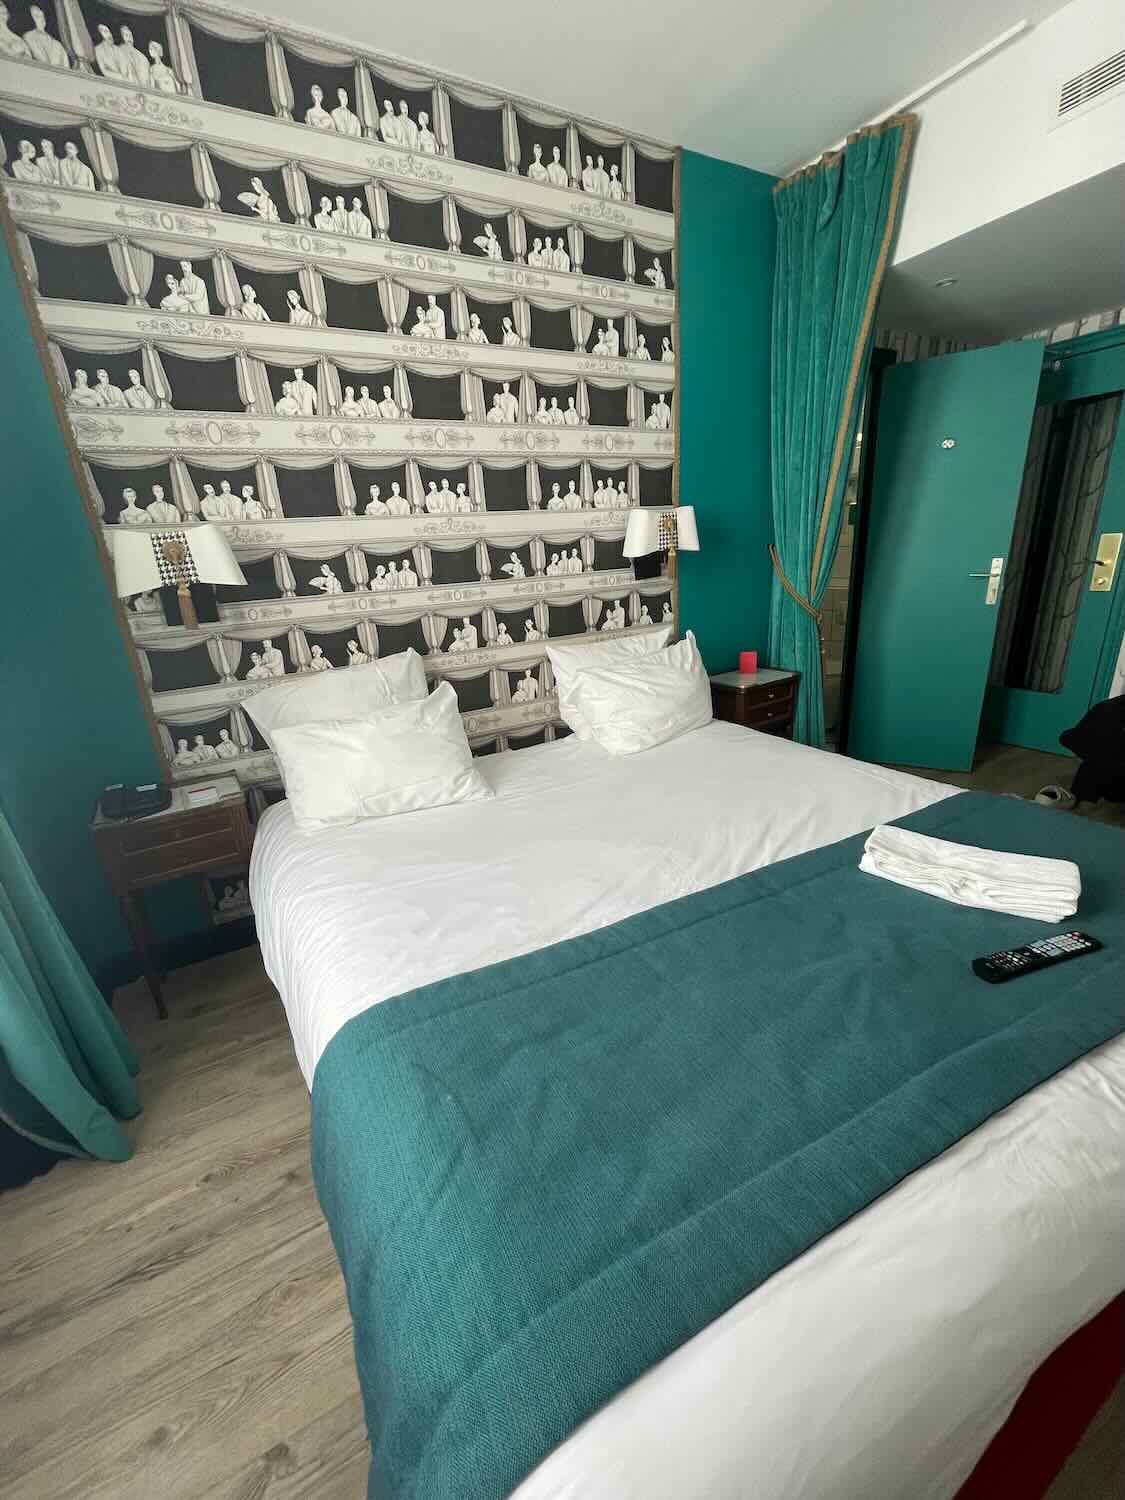 A stylish hotel room featuring a unique black and white sculpture-themed wallpaper, with neatly arranged white bedding on a bed, accented by a teal throw and matching teal curtains, offering a chic and artistic atmosphere.